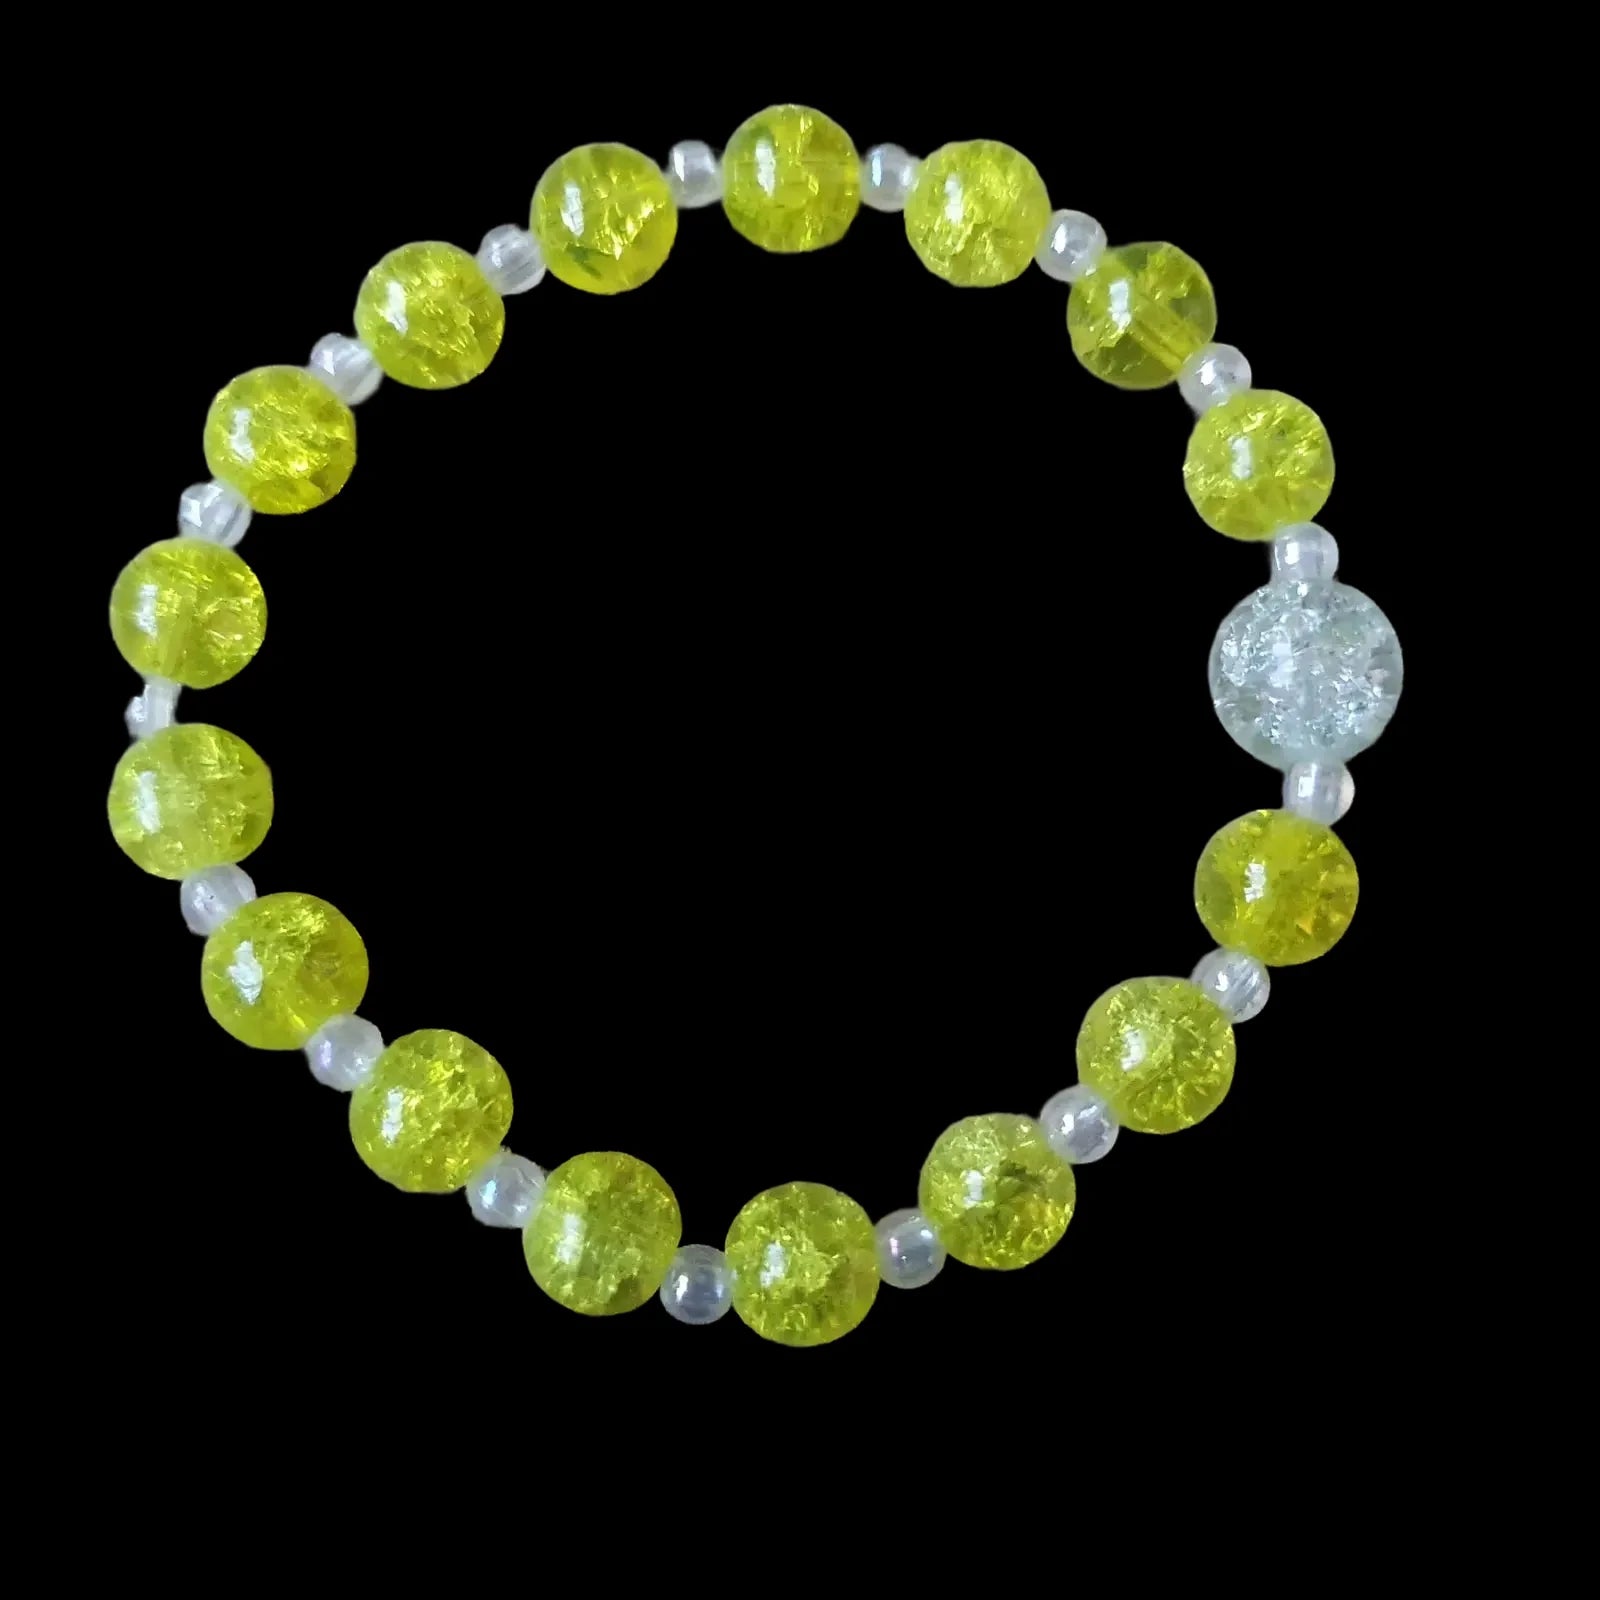 Unique Handmade Crafted Beaded Bracelet Yellow Gift